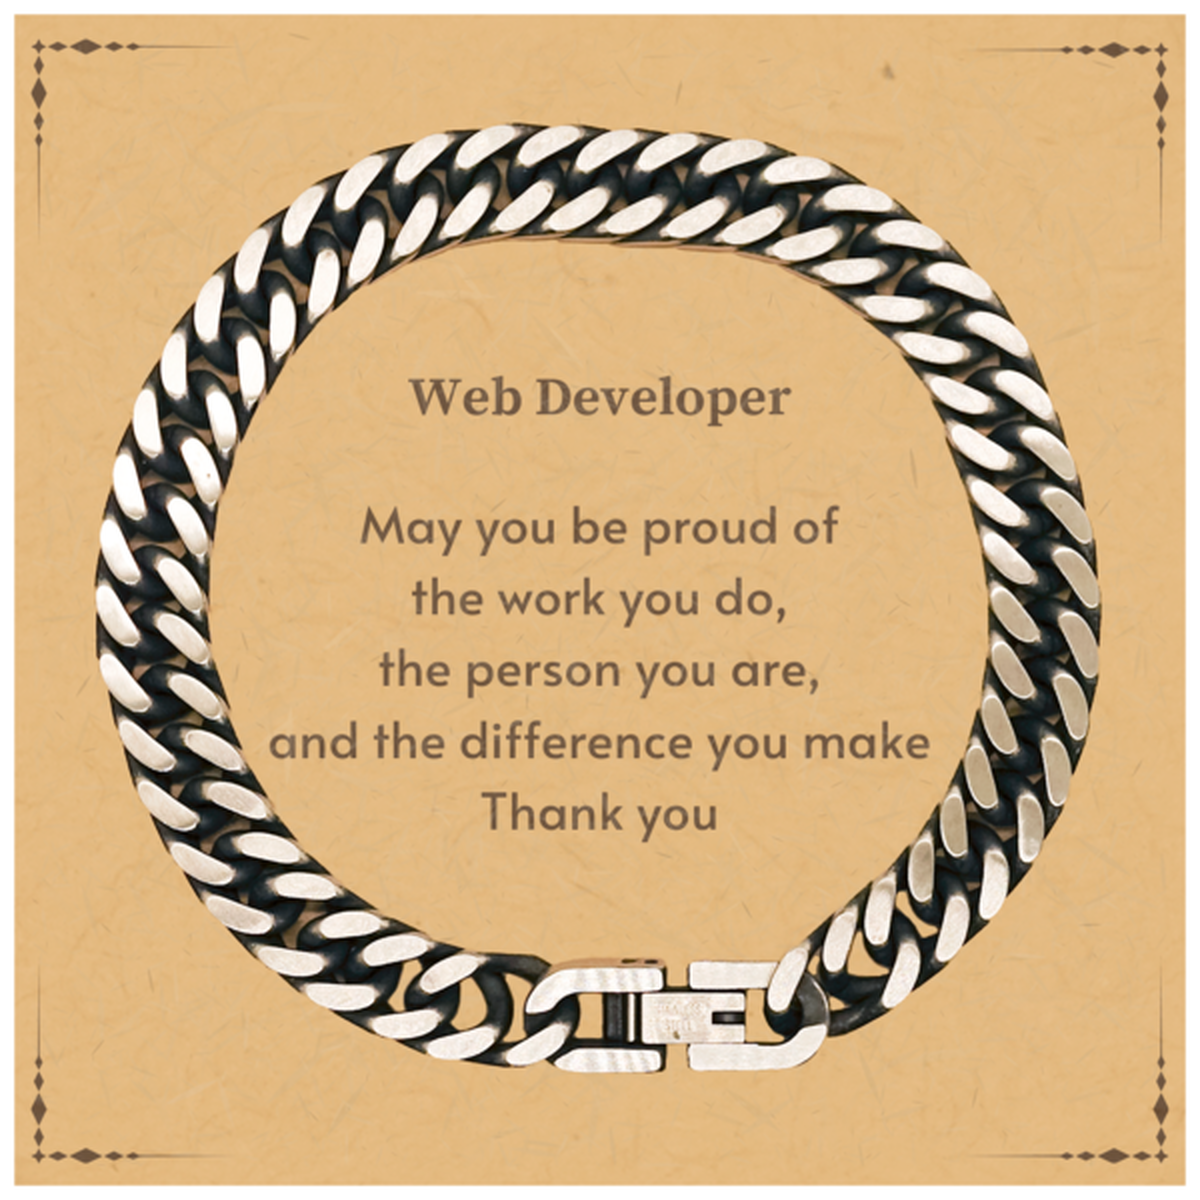 Heartwarming Cuban Link Chain Bracelet Retirement Coworkers Gifts for Web Developer, Web Developer May You be proud of the work you do, the person you are Gifts for Boss Men Women Friends